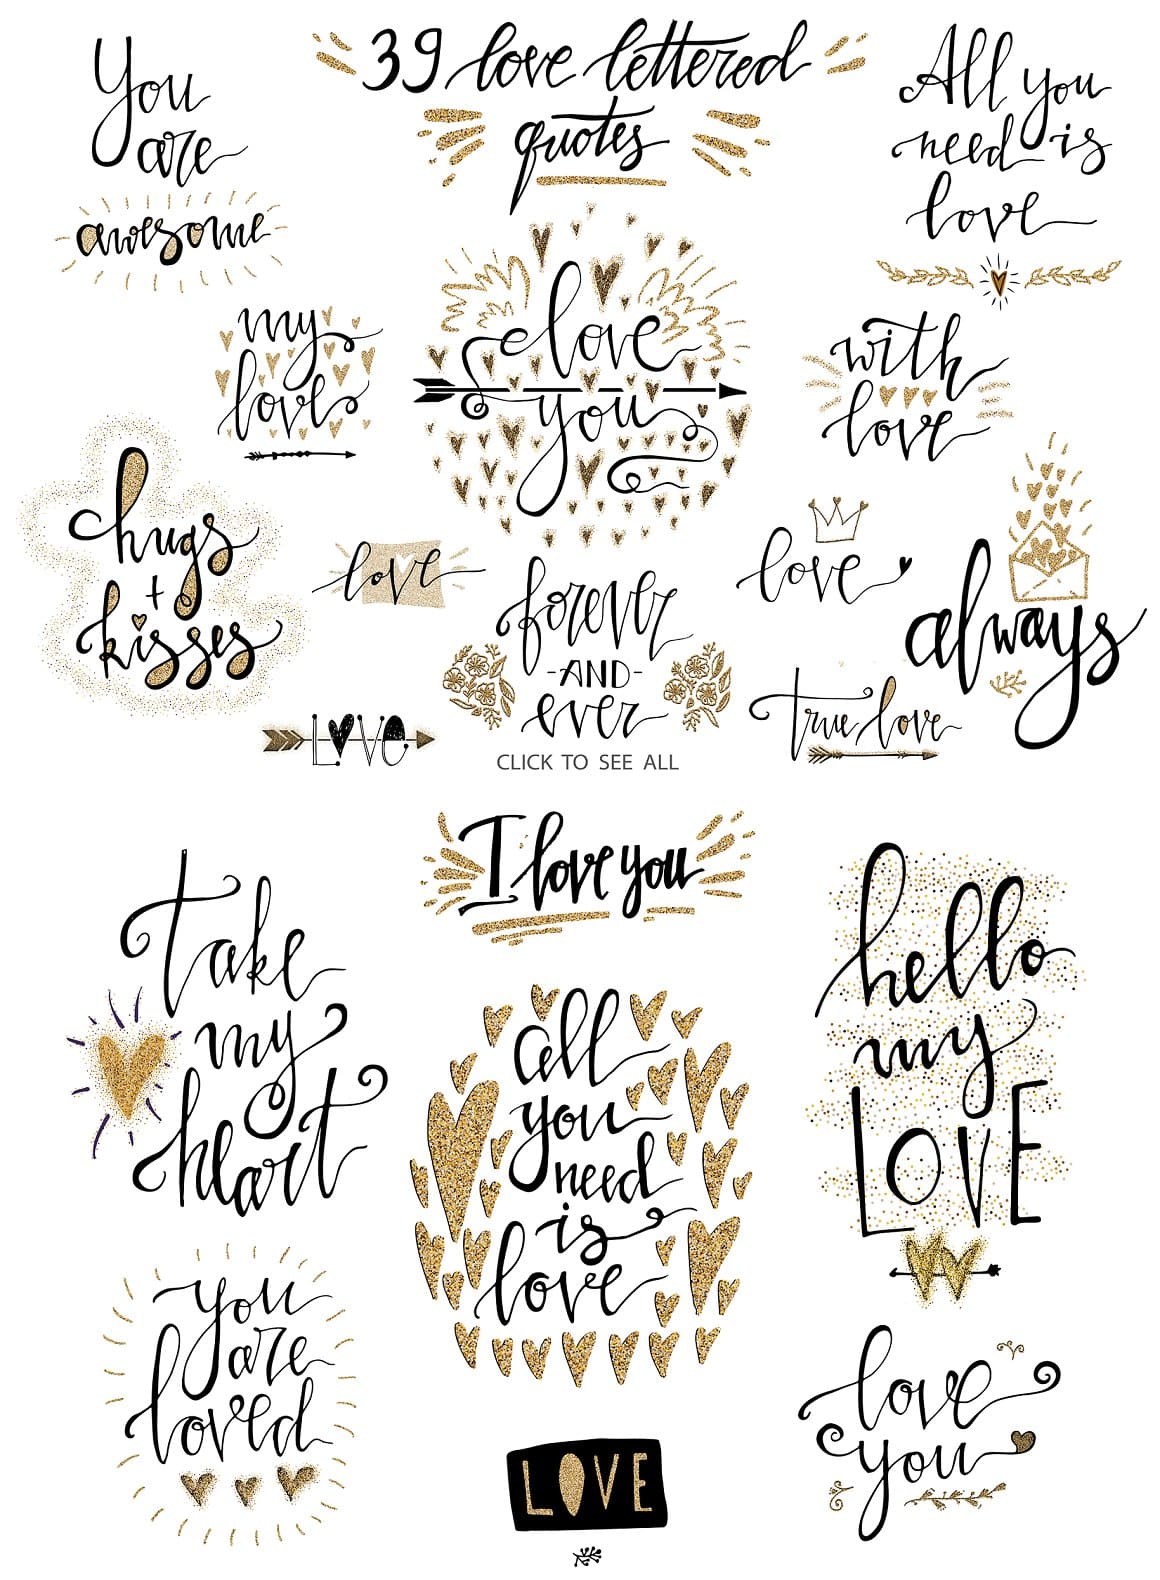 39 love lettered quotes.